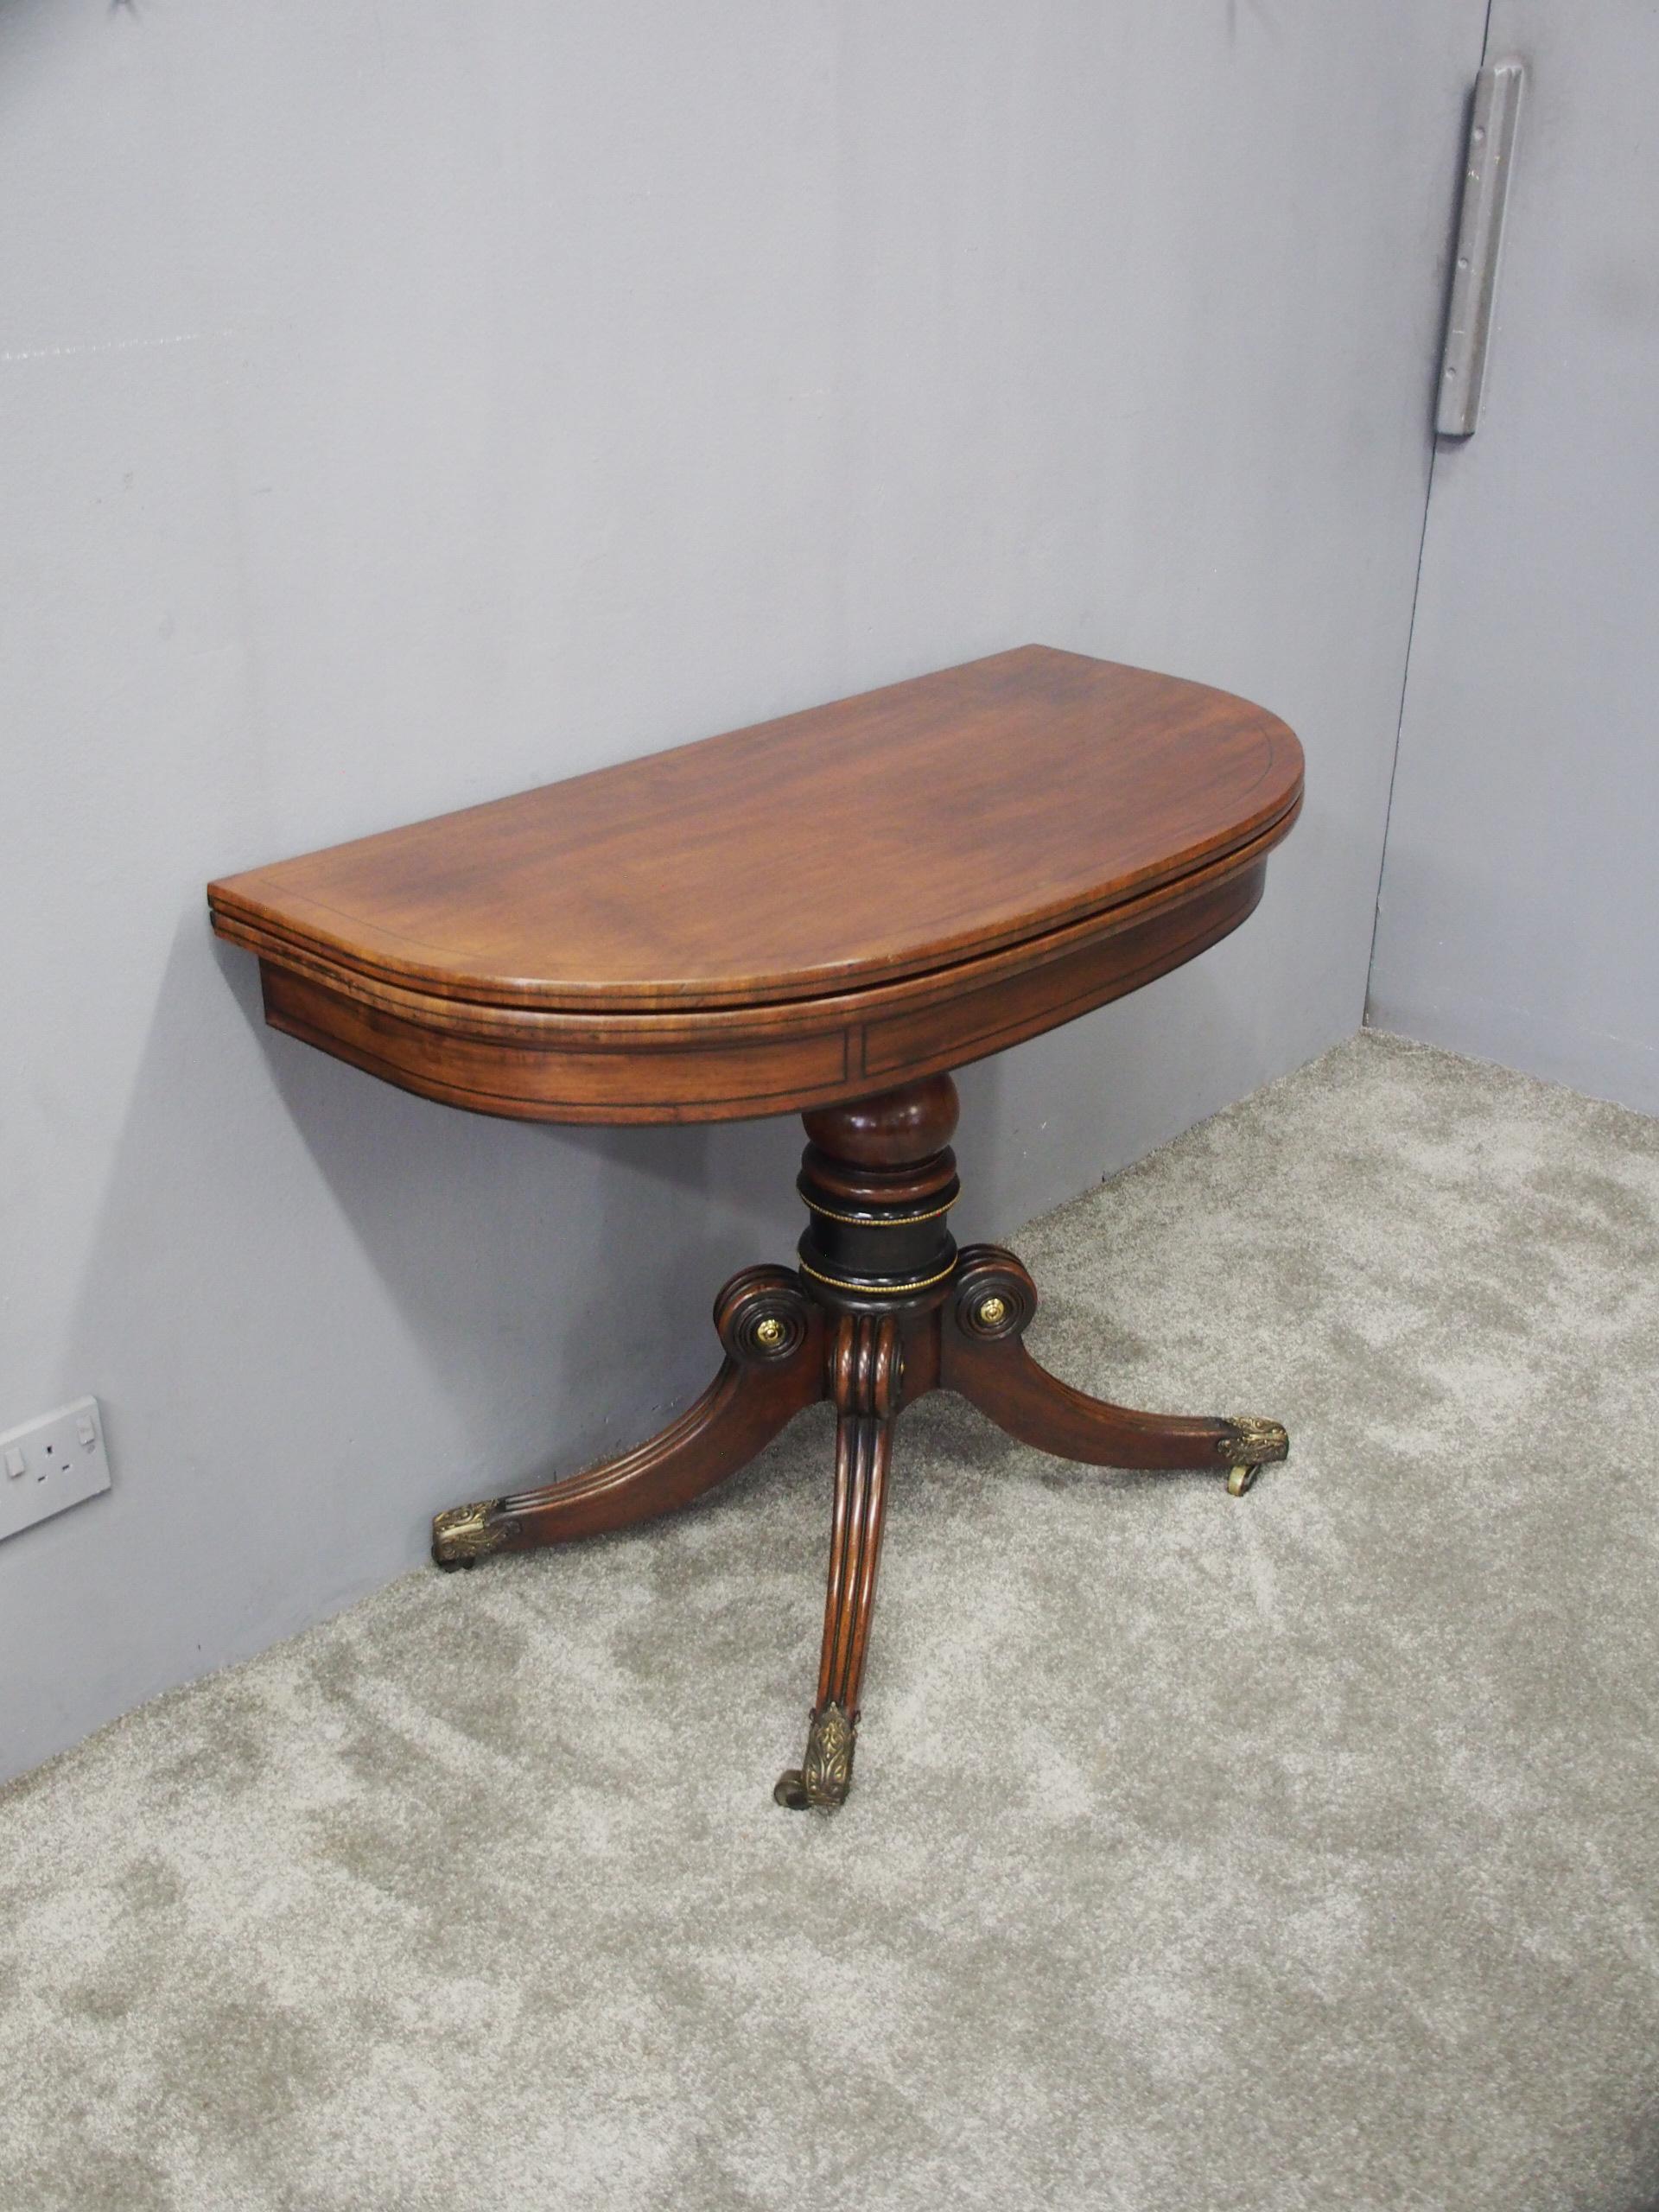 Scottish mahogany D shaped card table. With ebony string inlay to the front, the hinged top opens to reveal an inlaid interior and it has a frieze decorated with ebonized panels. The quadruple sabre leg base has ring turned sections, banded in